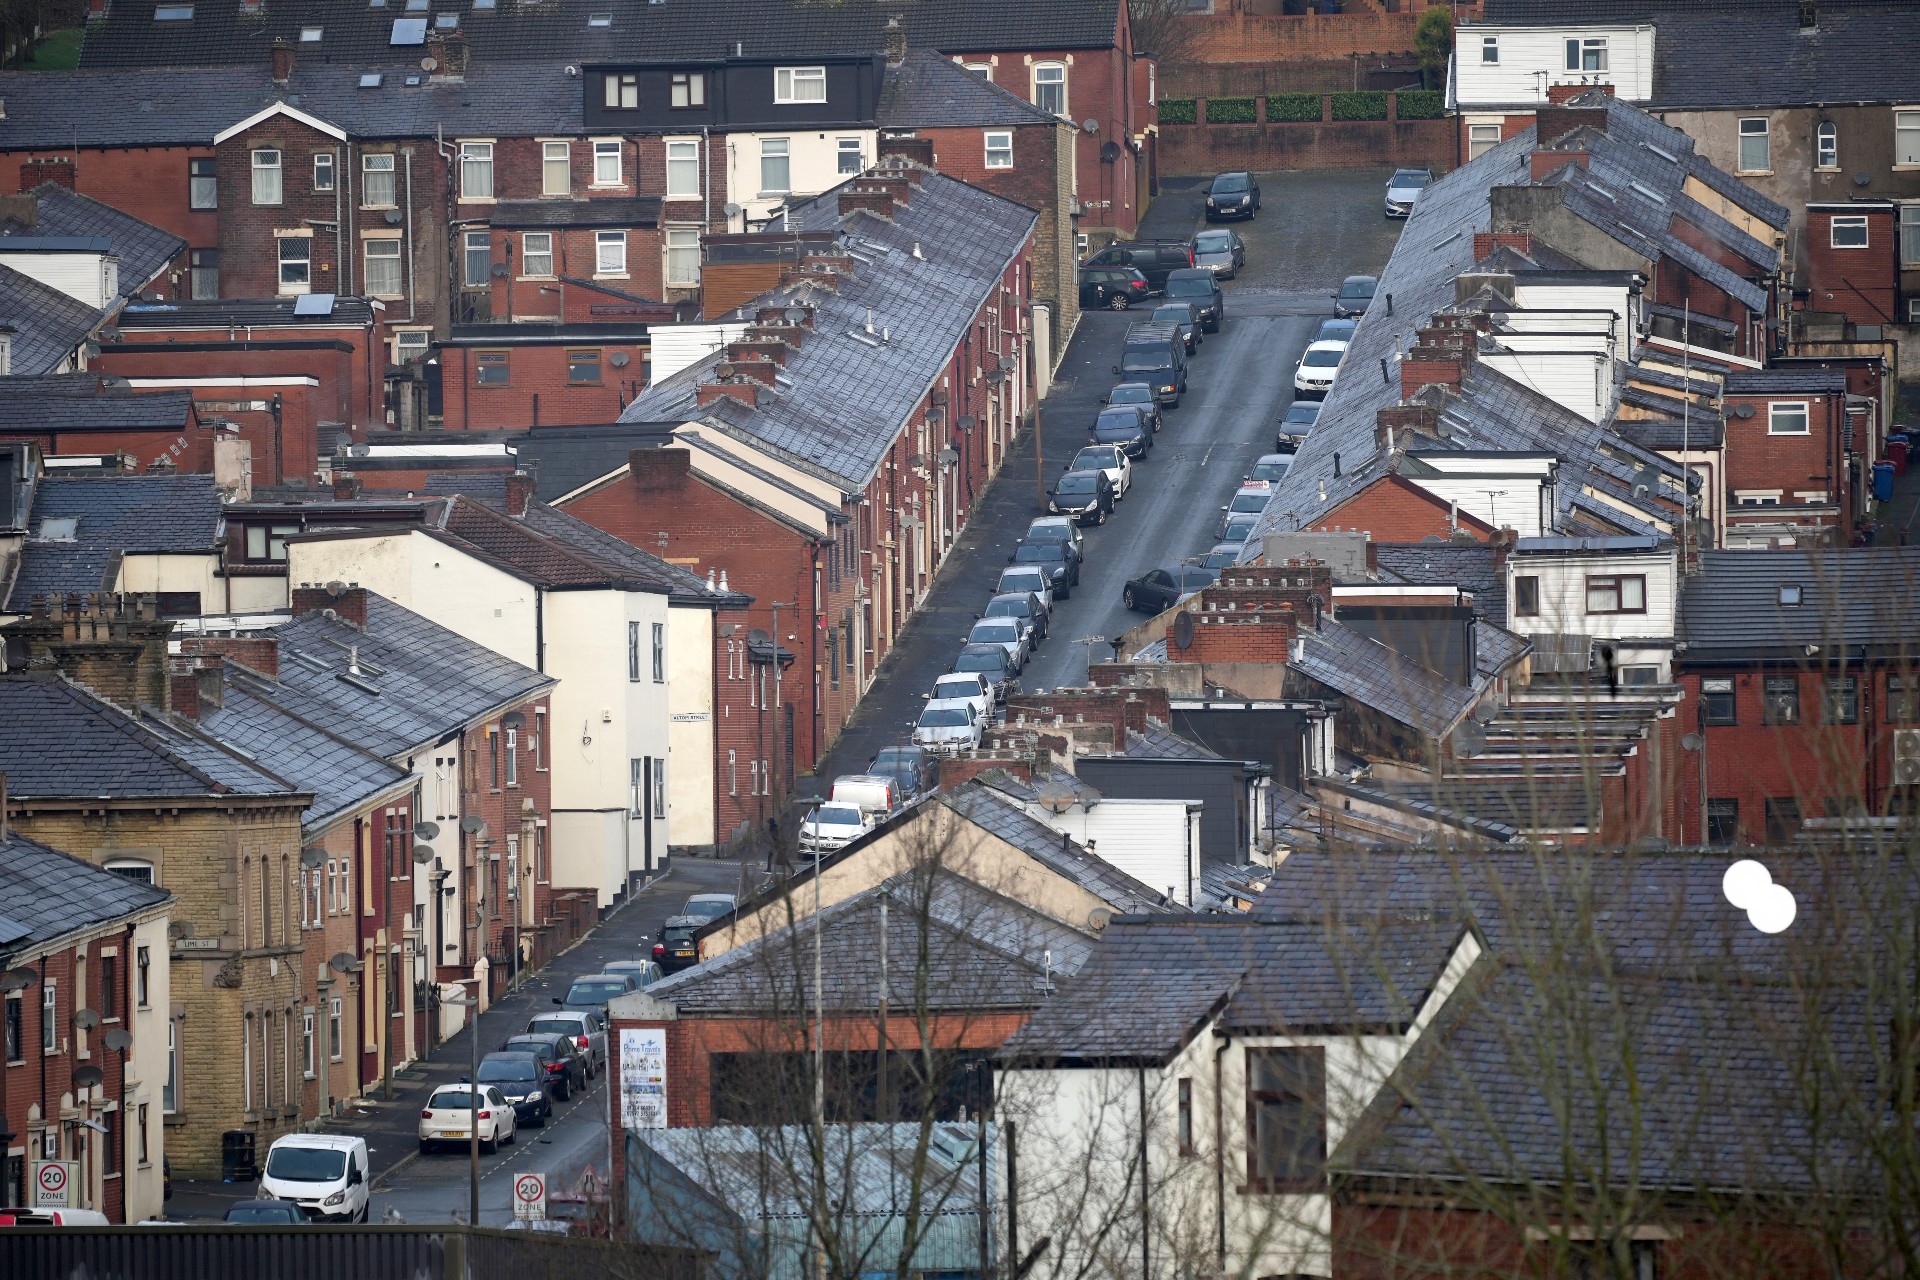 A general view of the northern English city of Blackburn, where Malik Faisal Akram was from. Photo: Christopher Furlong/Getty Images